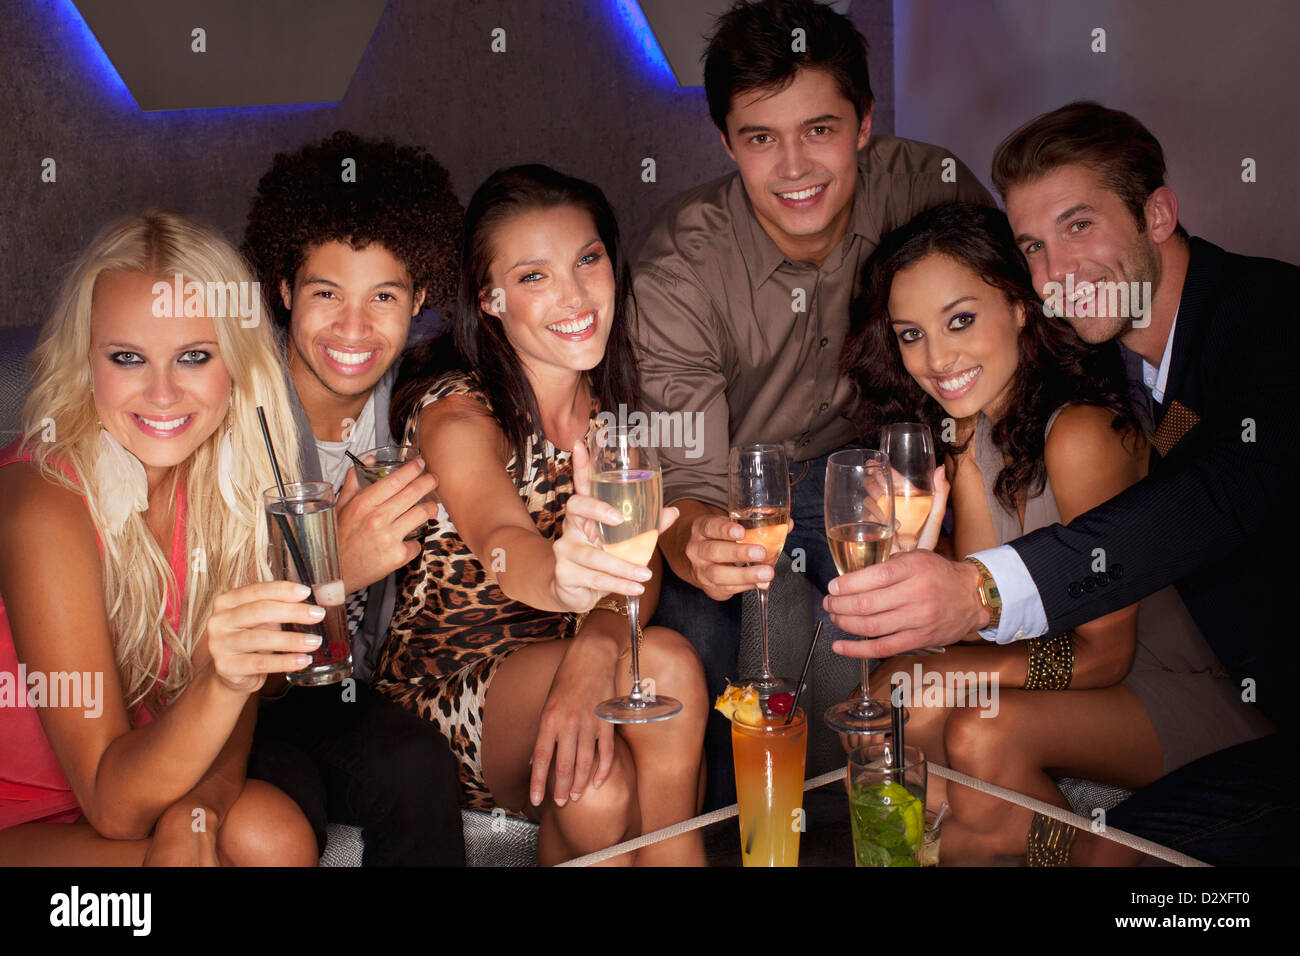 Portrait of smiling friends toasting cocktails in nightclub Banque D'Images